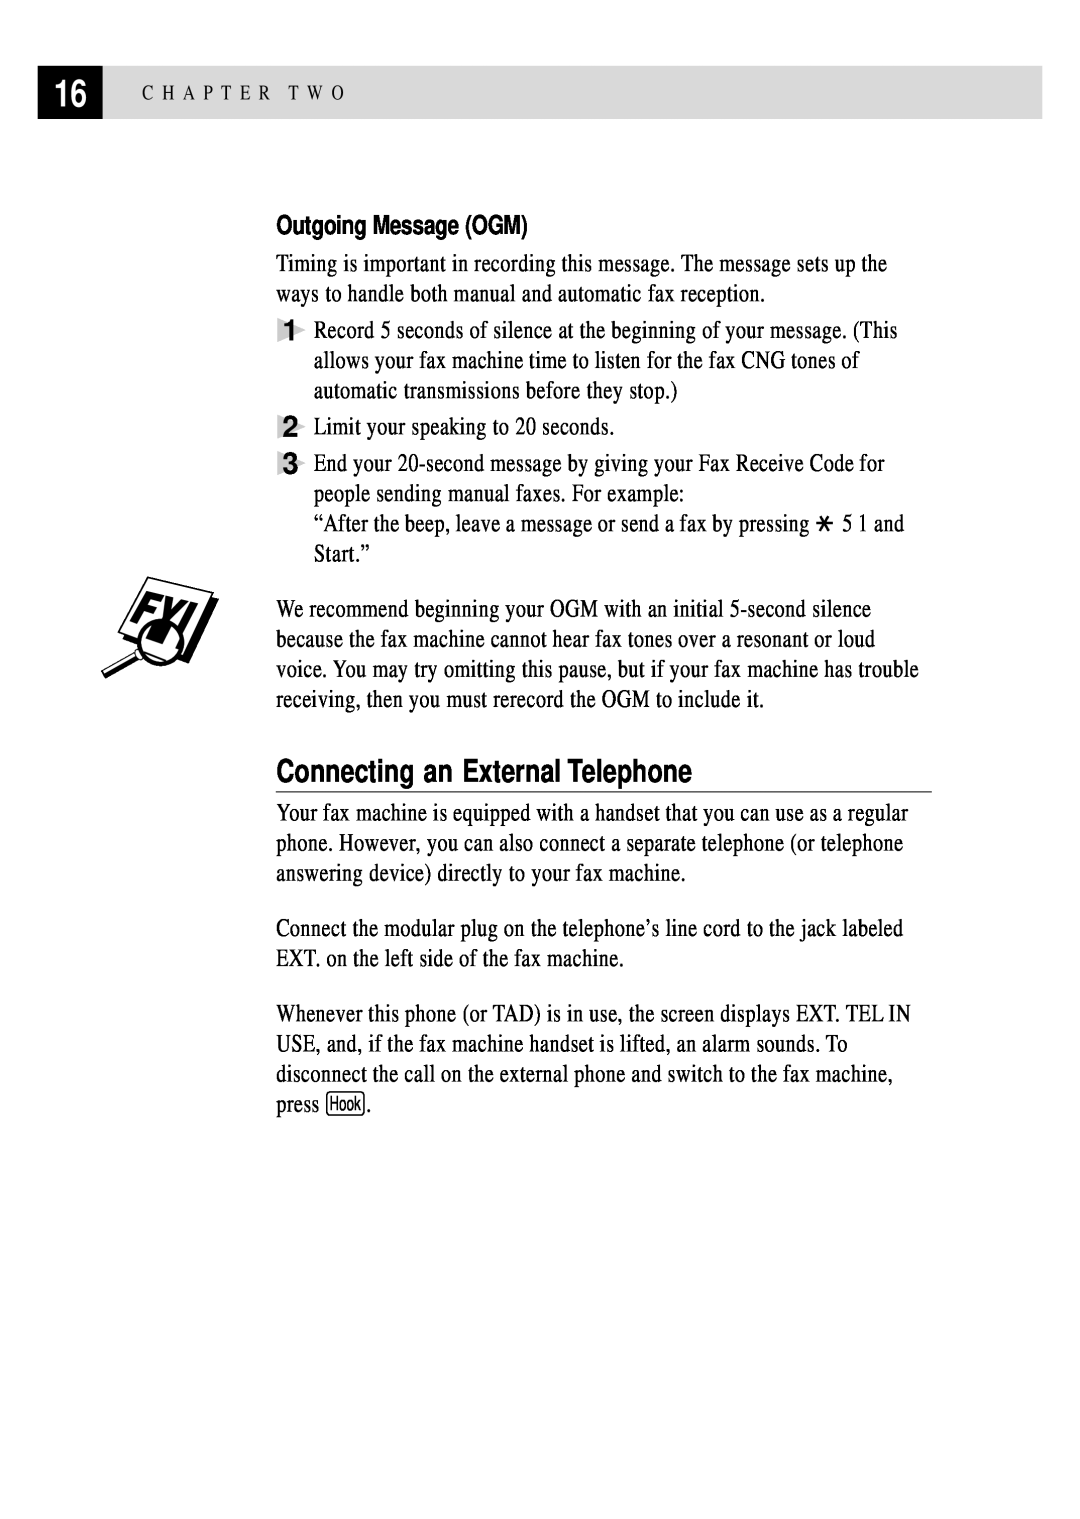 Brother FAX 255 owner manual Connecting an External Telephone, Outgoing Message OGM 